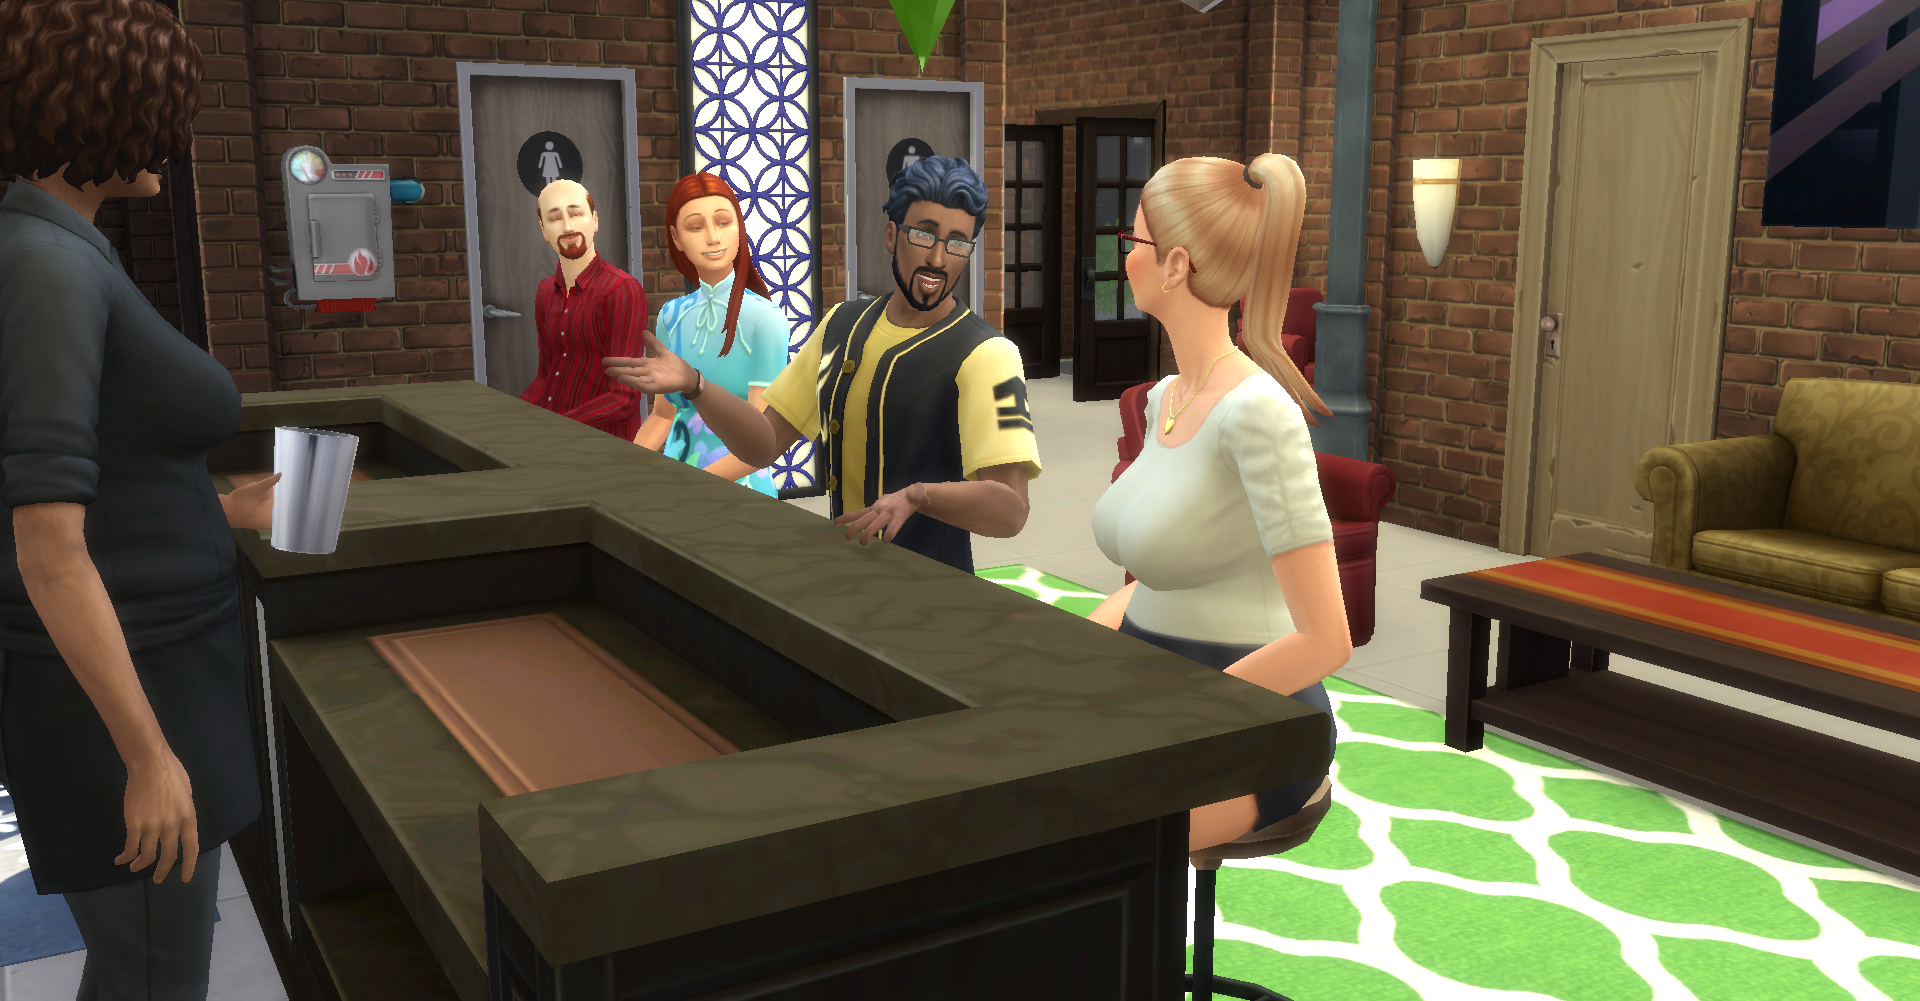 Hot Complications Sims Story Page 5 The Sims 4 General Discussion 7693